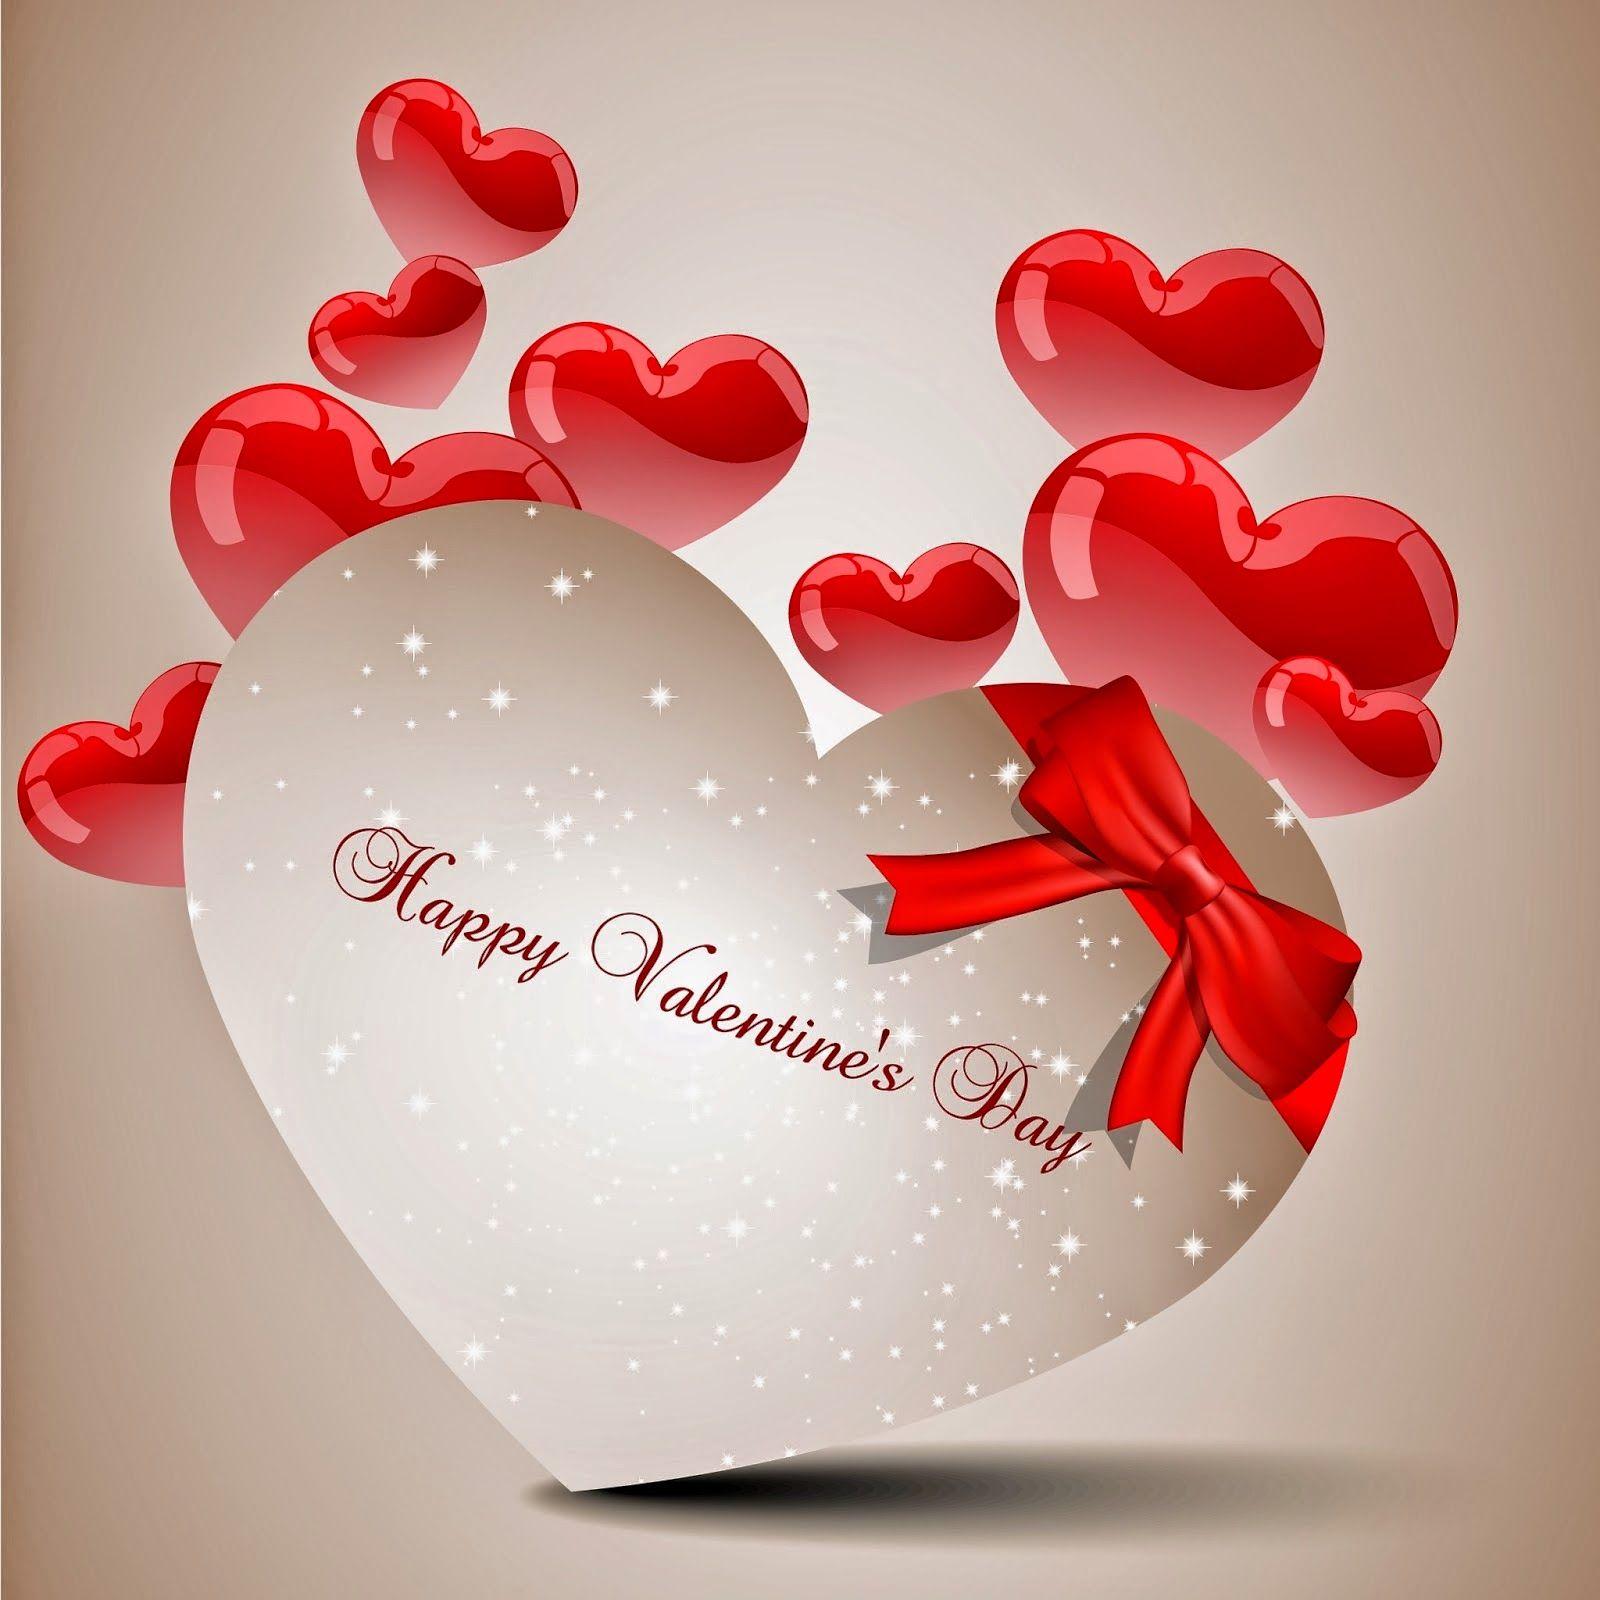 Happy Valentines Day 2019 Image, Song, Picture, Video, Card, GIF